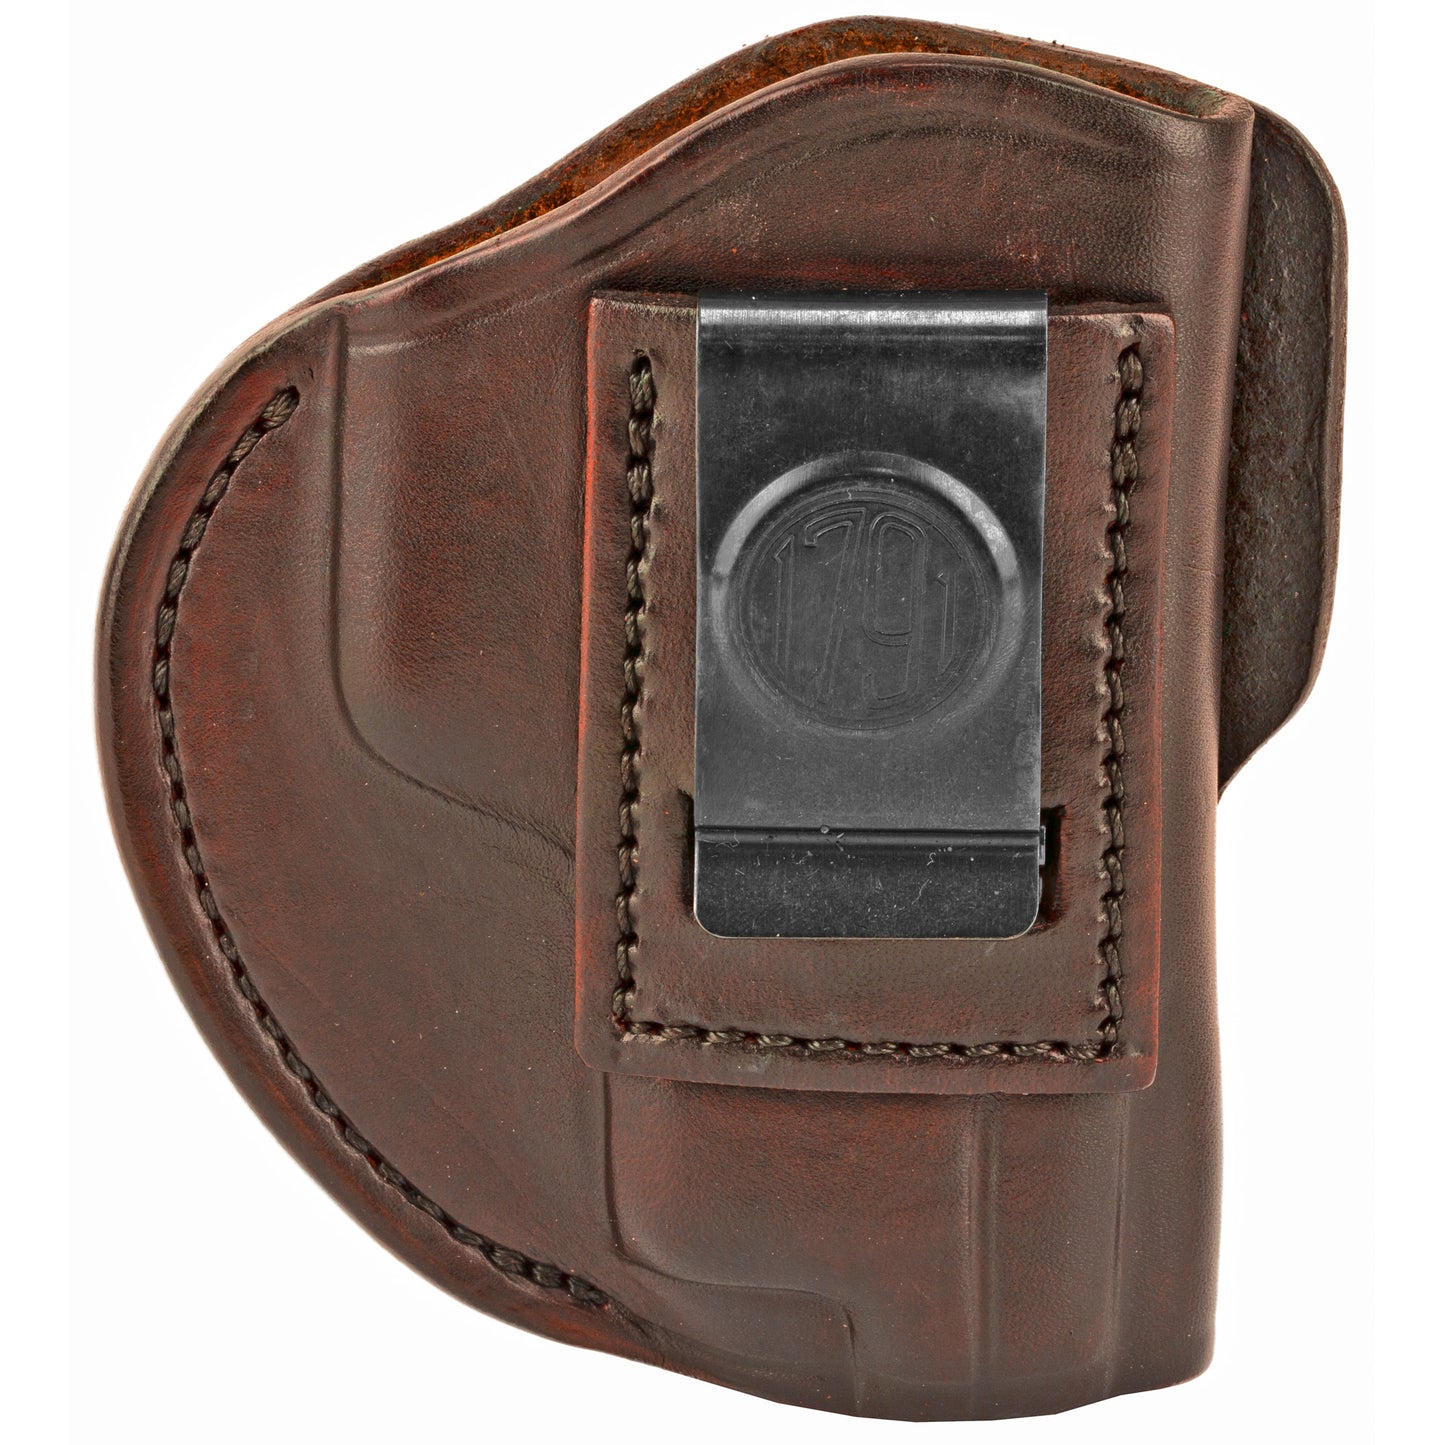 1791 4 Way Holster Leather Belt Holster Right Brown Fits Glock 17 19 22  Size 5